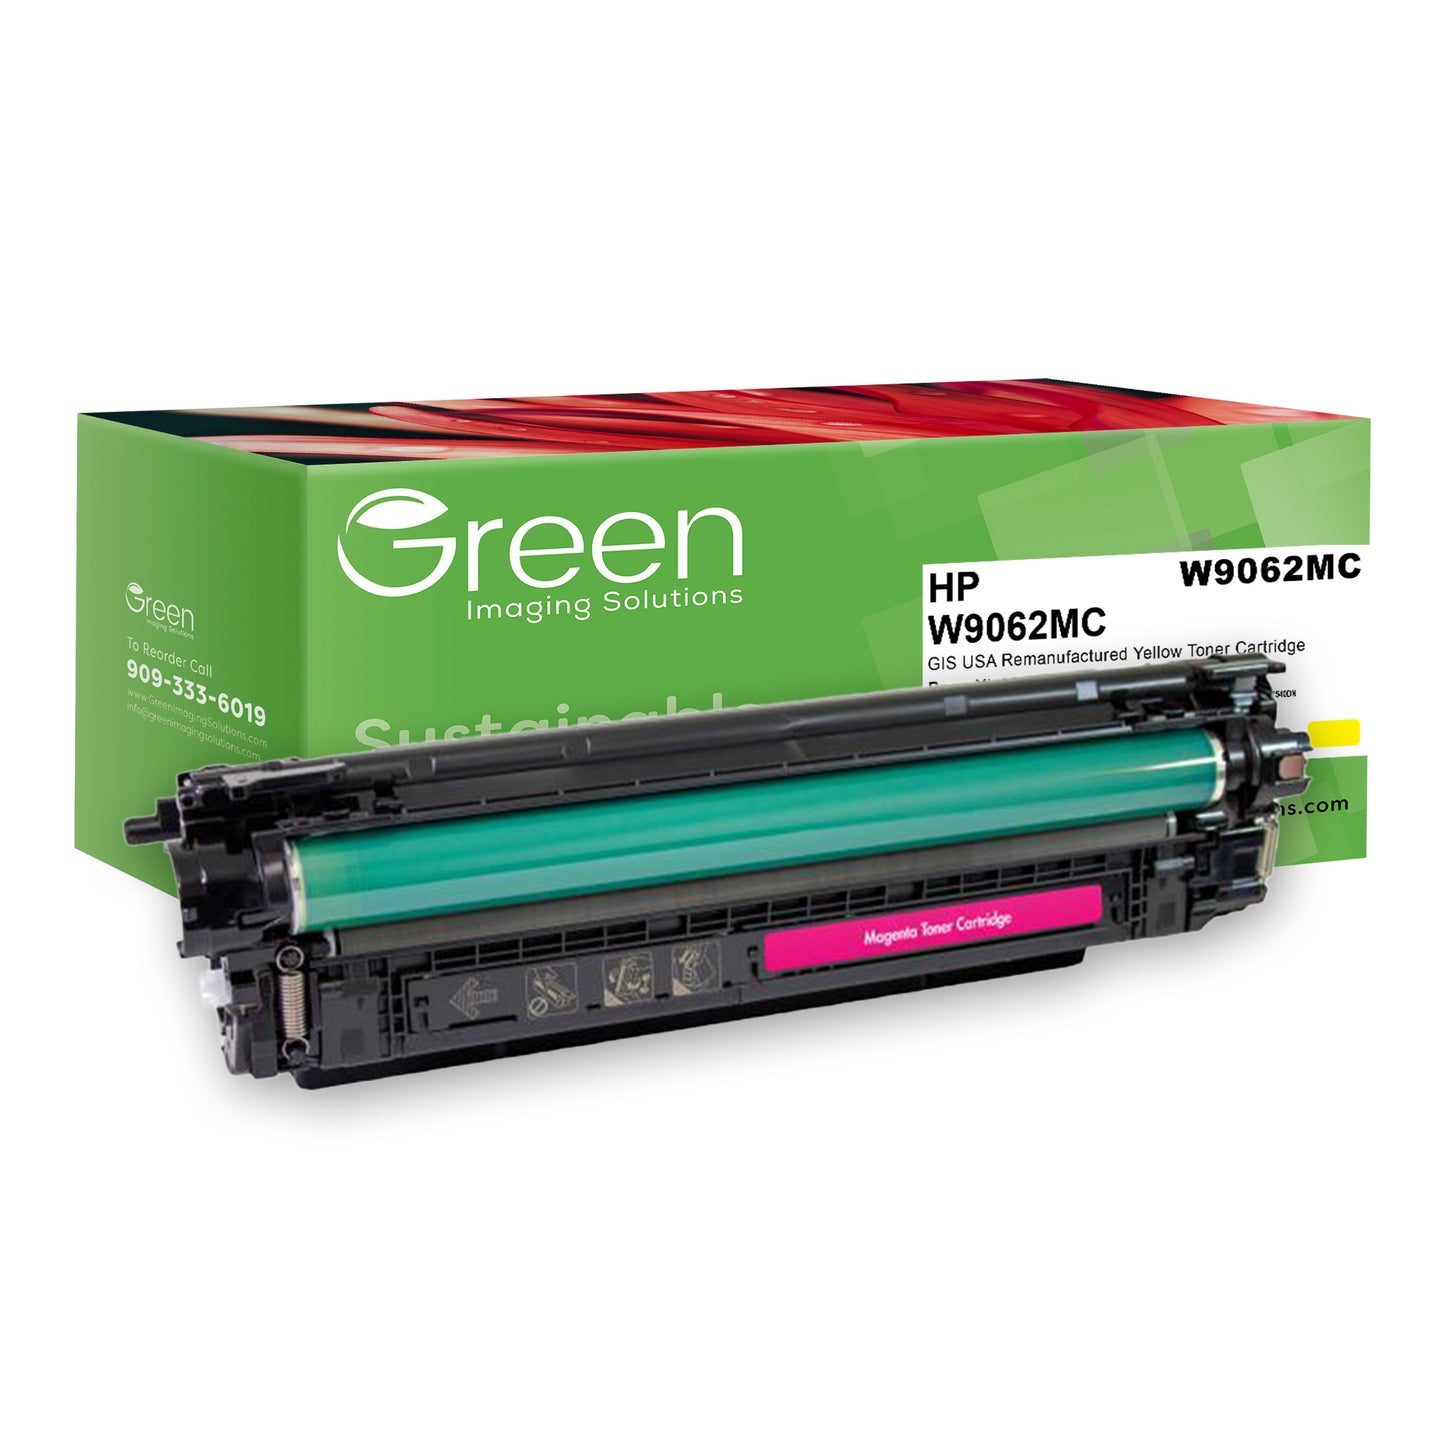 Green Imaging Solutions USA Remanufactured Yellow Cartridge for HP W9062MC